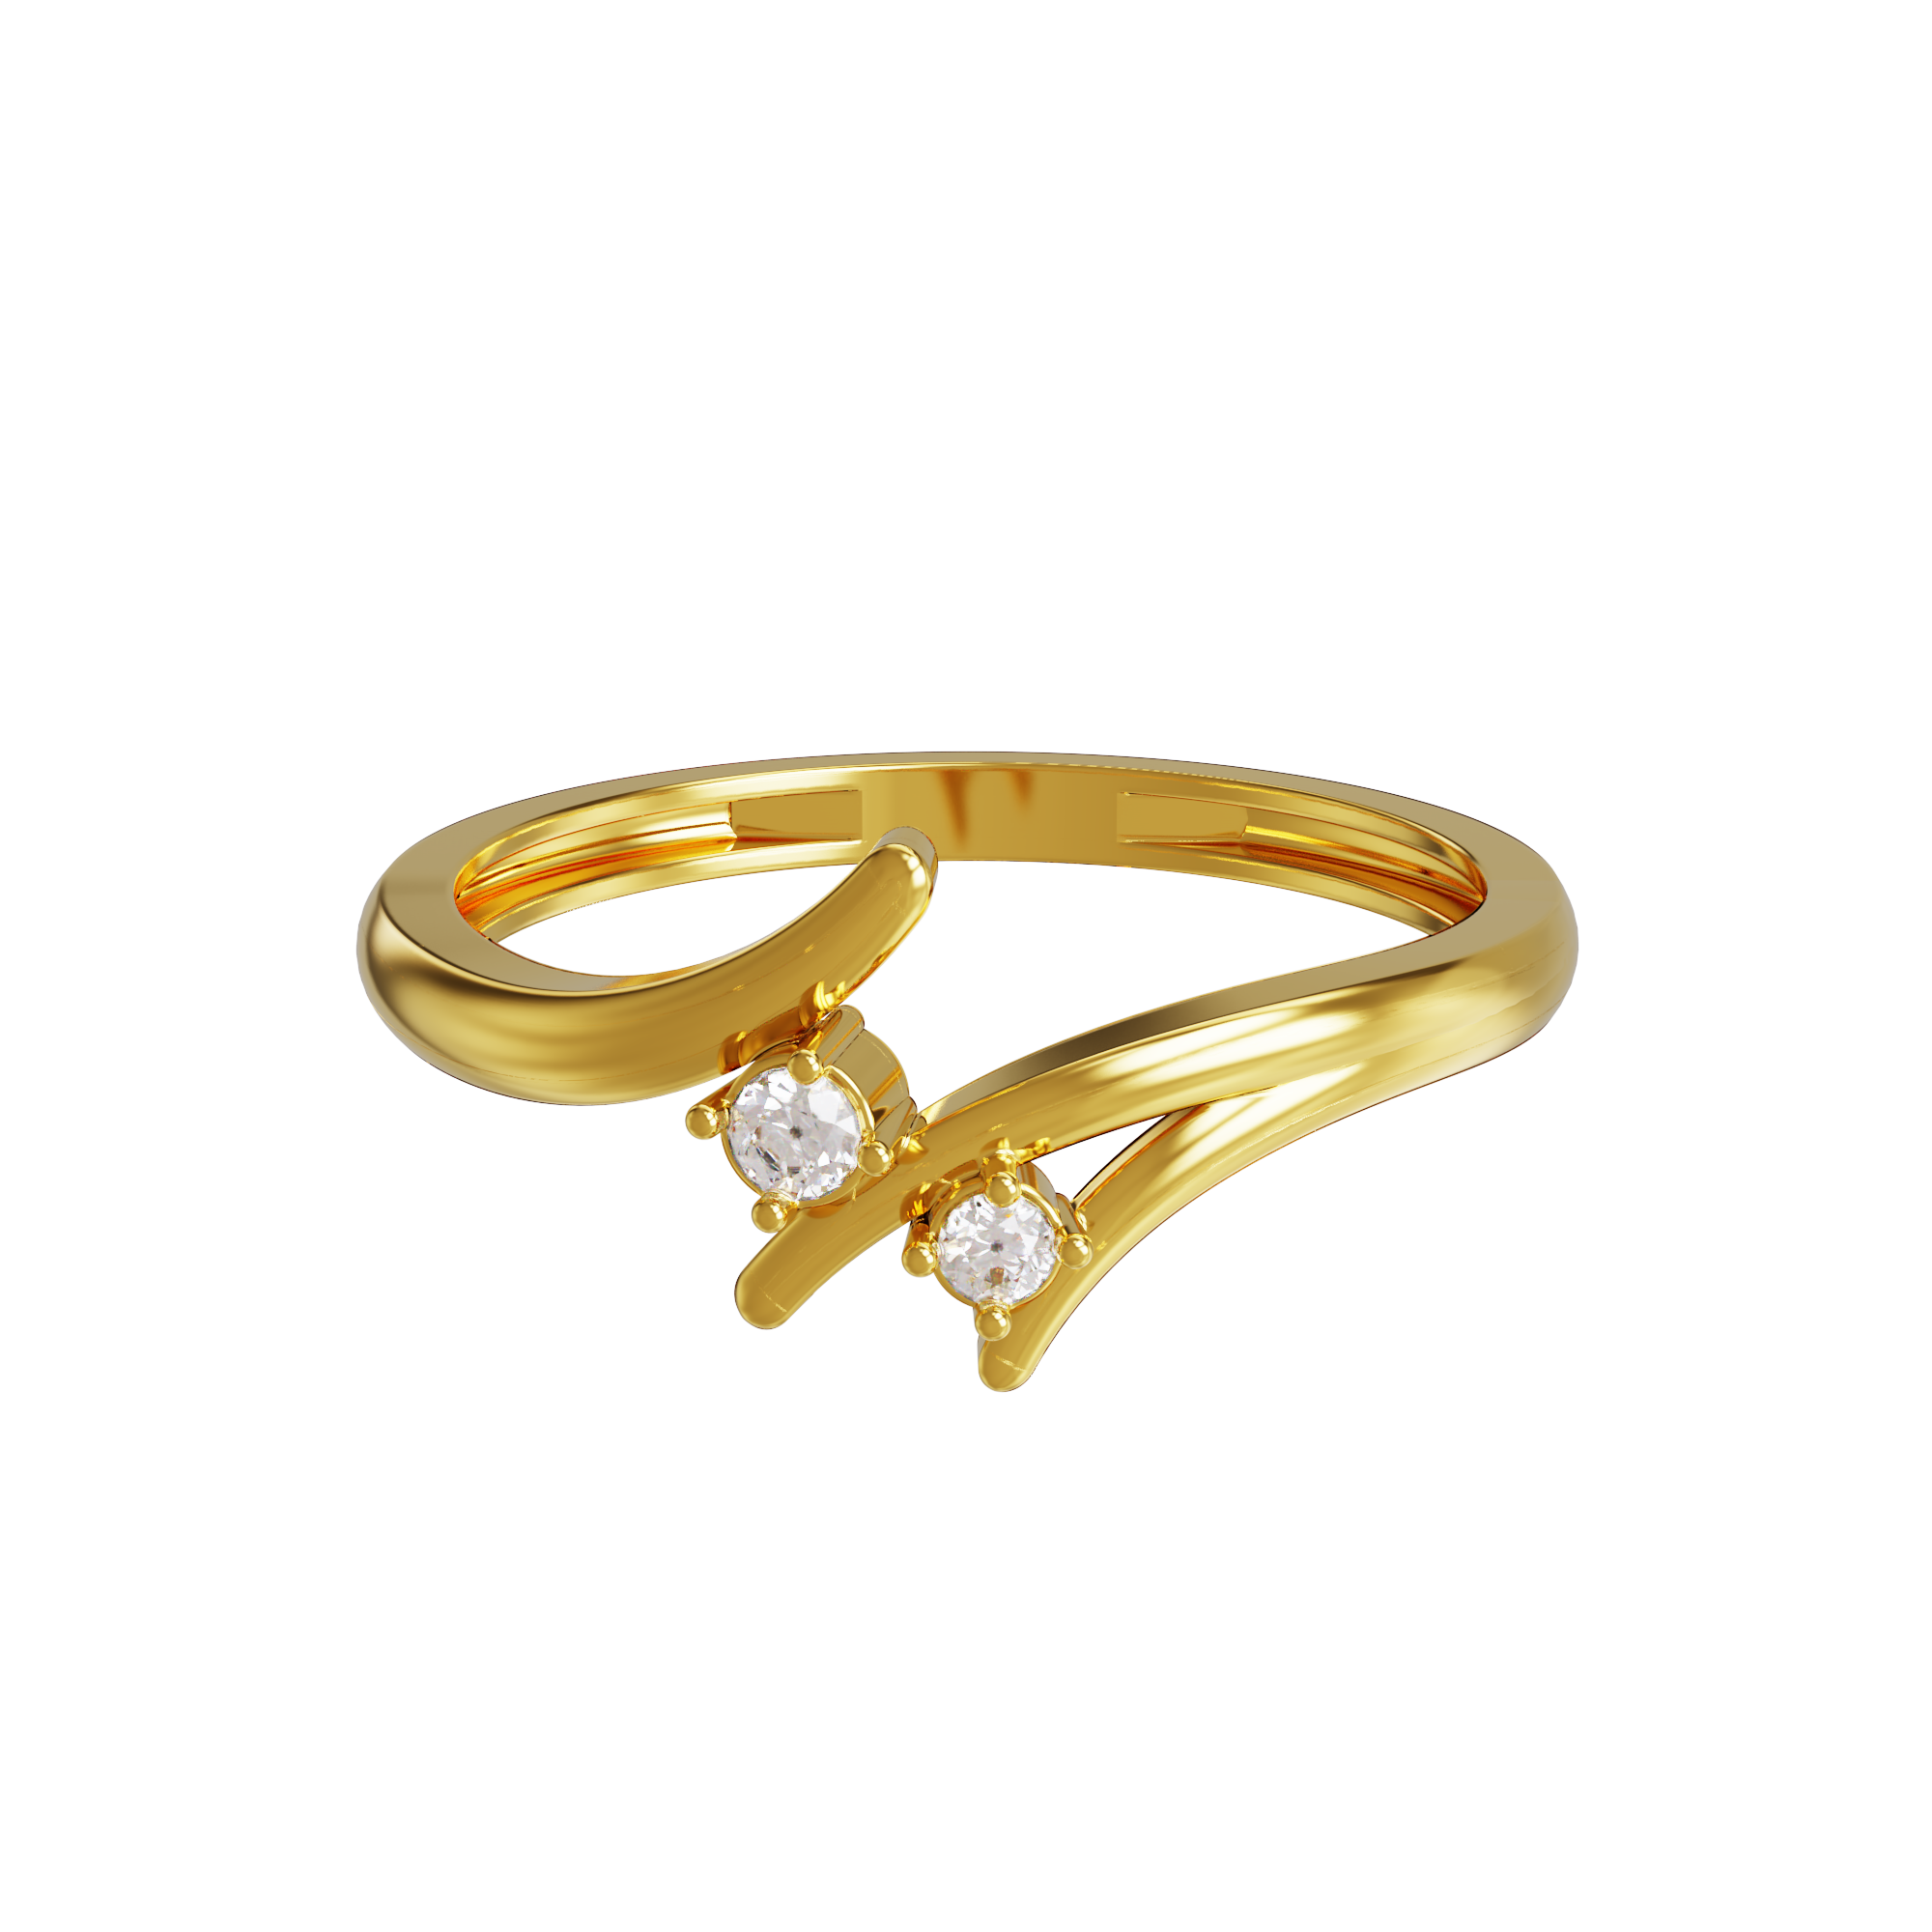 Gold Stone Ring Design for Men at Best Price | Parakkat Jewels-tuongthan.vn